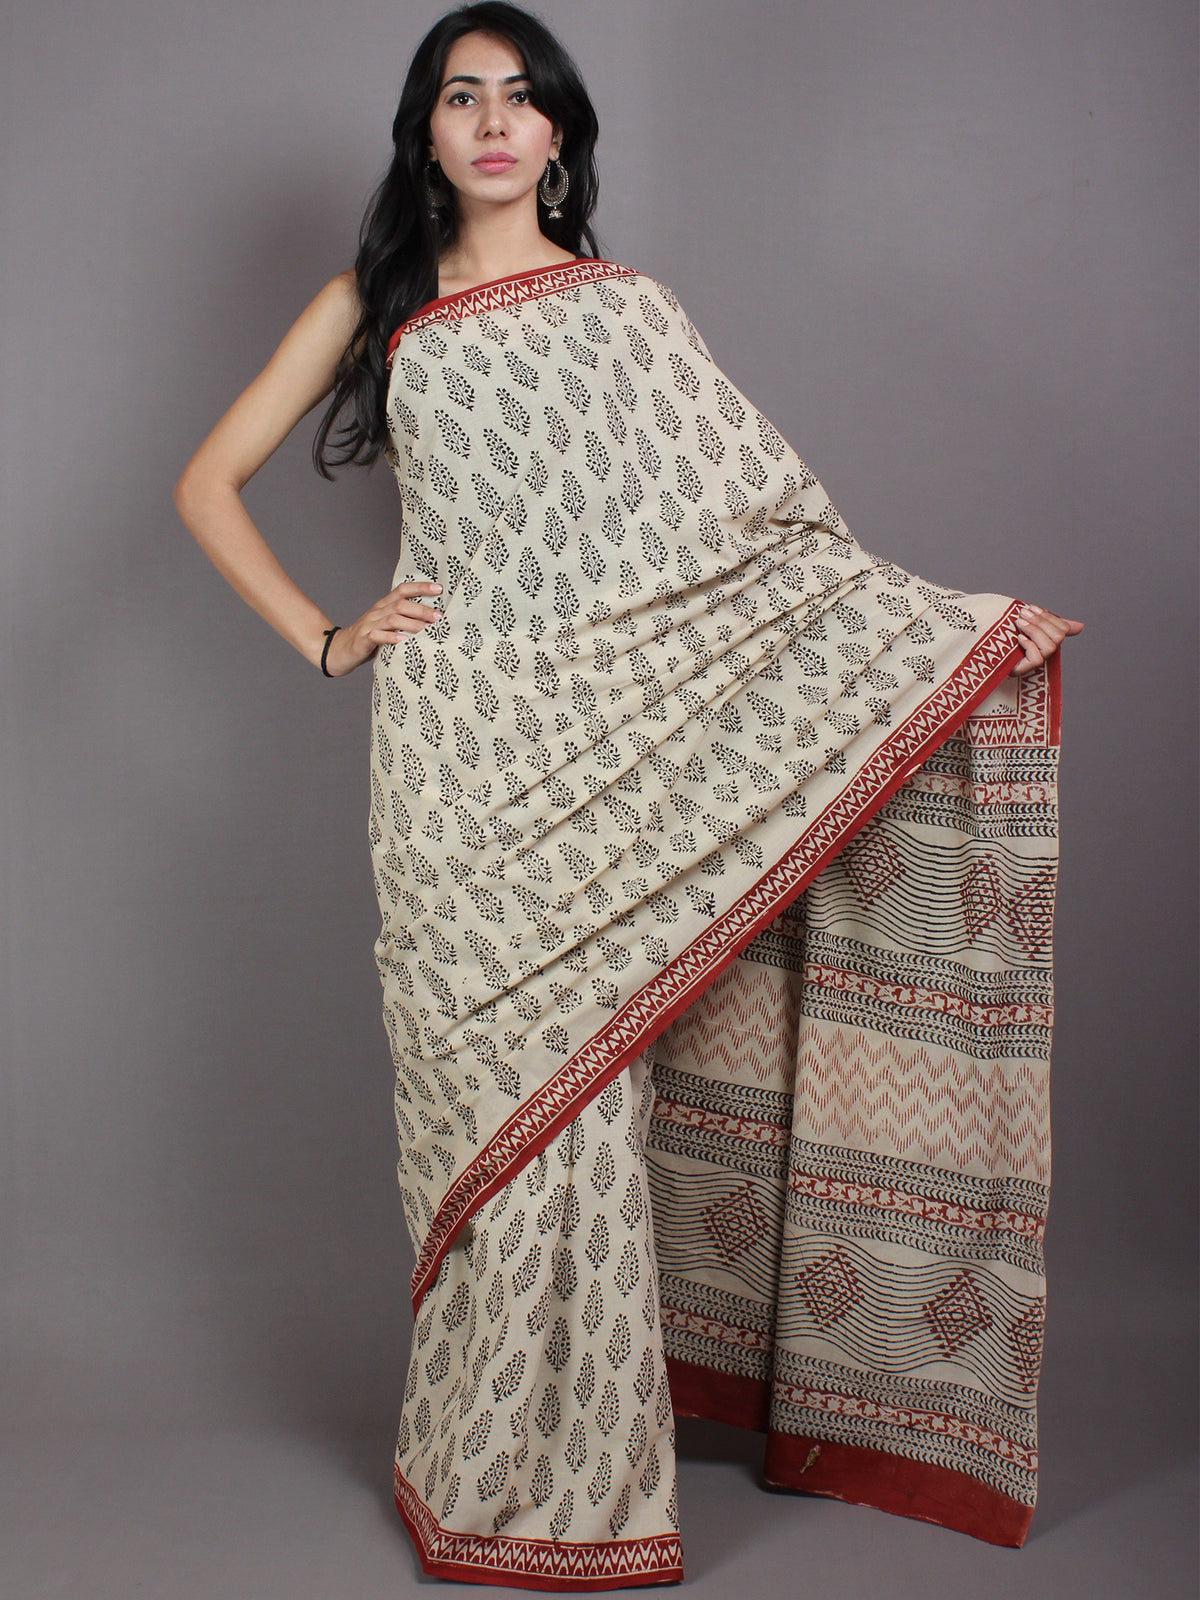 Beige Black Maroon Cotton Hand Block Printed Saree in Natural Colors - S03170568